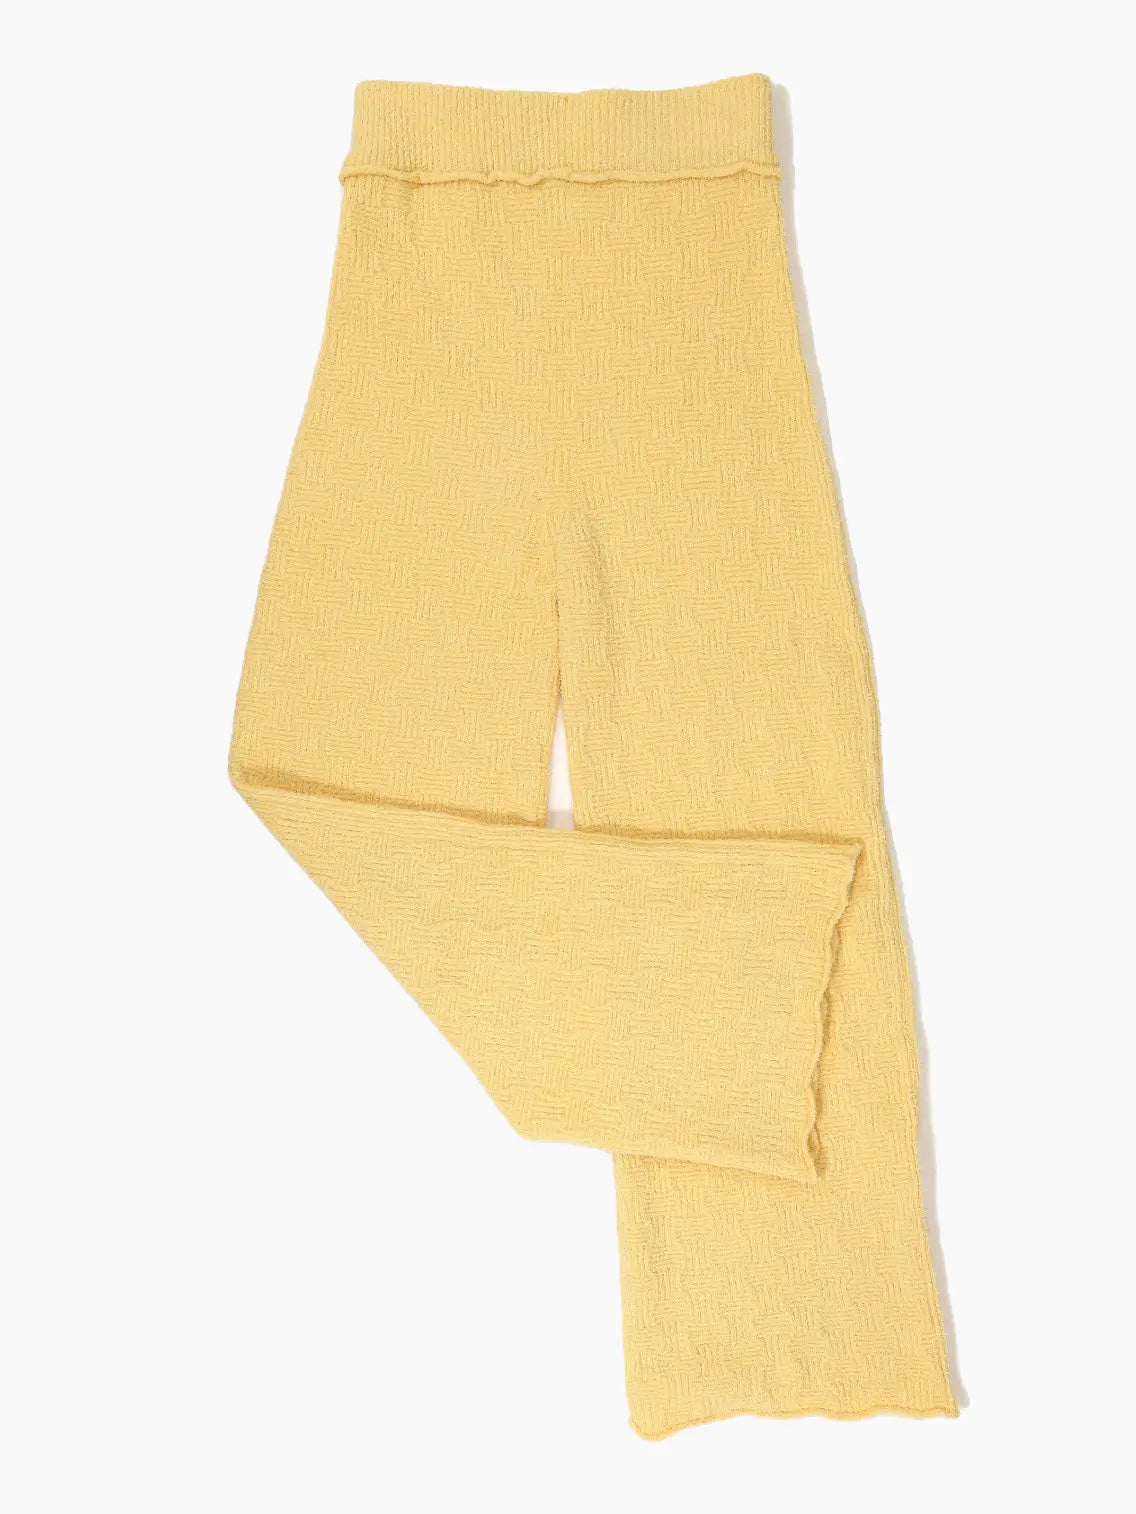 A pair of Tofu Pants Yellow from Rus with a flared leg from BassalStore. The waistband is ribbed, and the pants feature a subtle wavy pattern throughout. The fabric appears soft and cozy, suitable for casual or lounge wear.